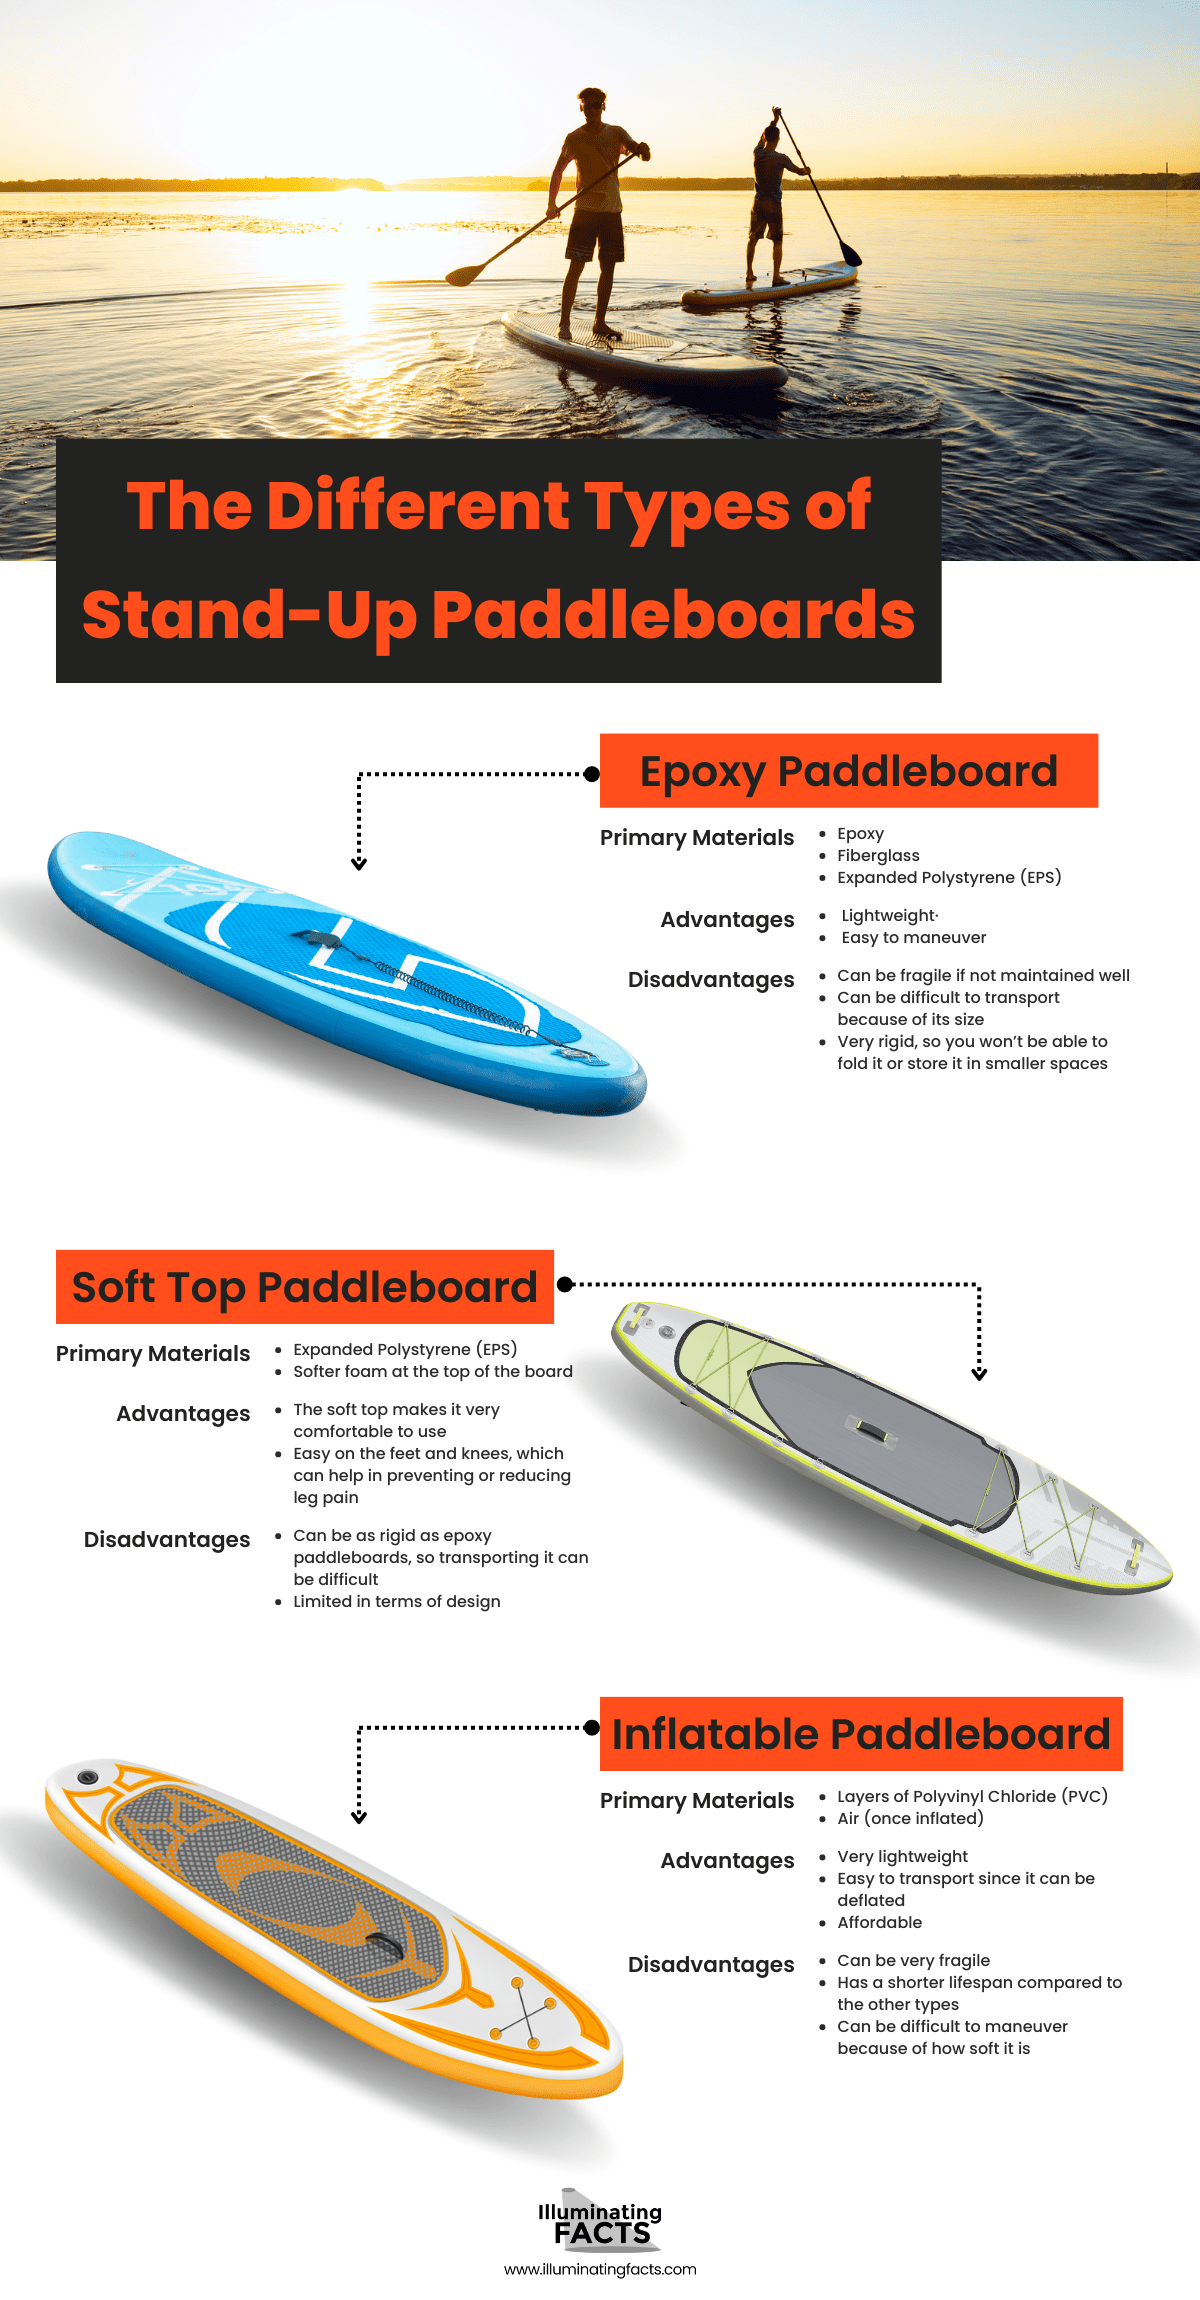 The Different Types of Stand-Up Paddleboards